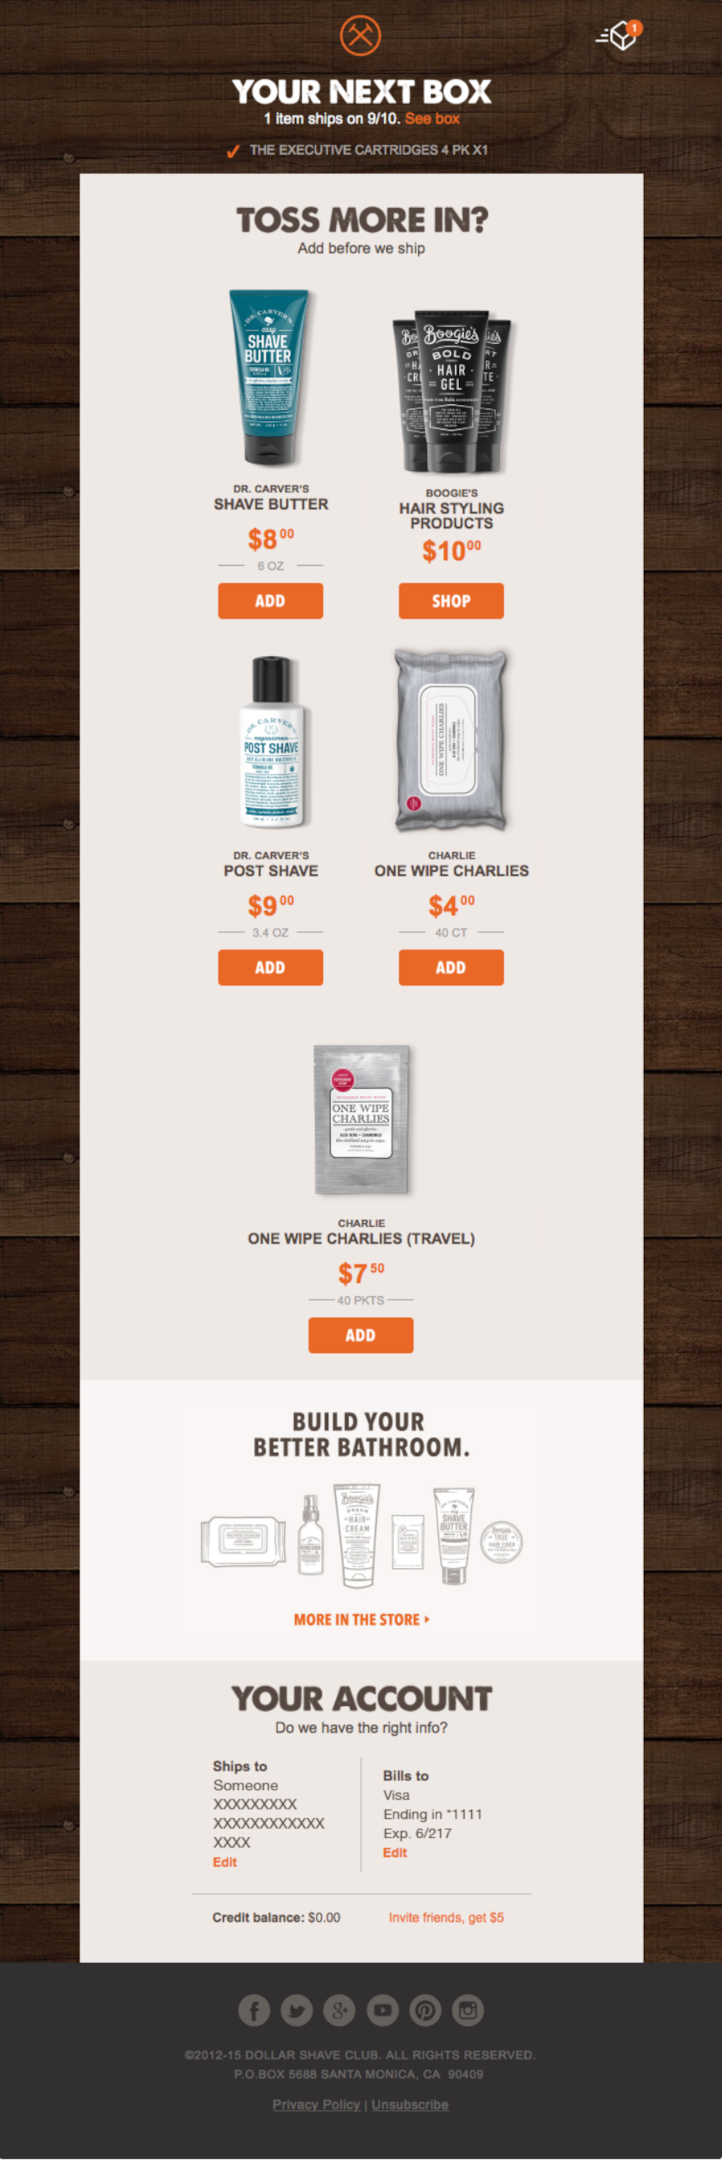 Dollar Shave Club Replenishment Email With Cross Sell